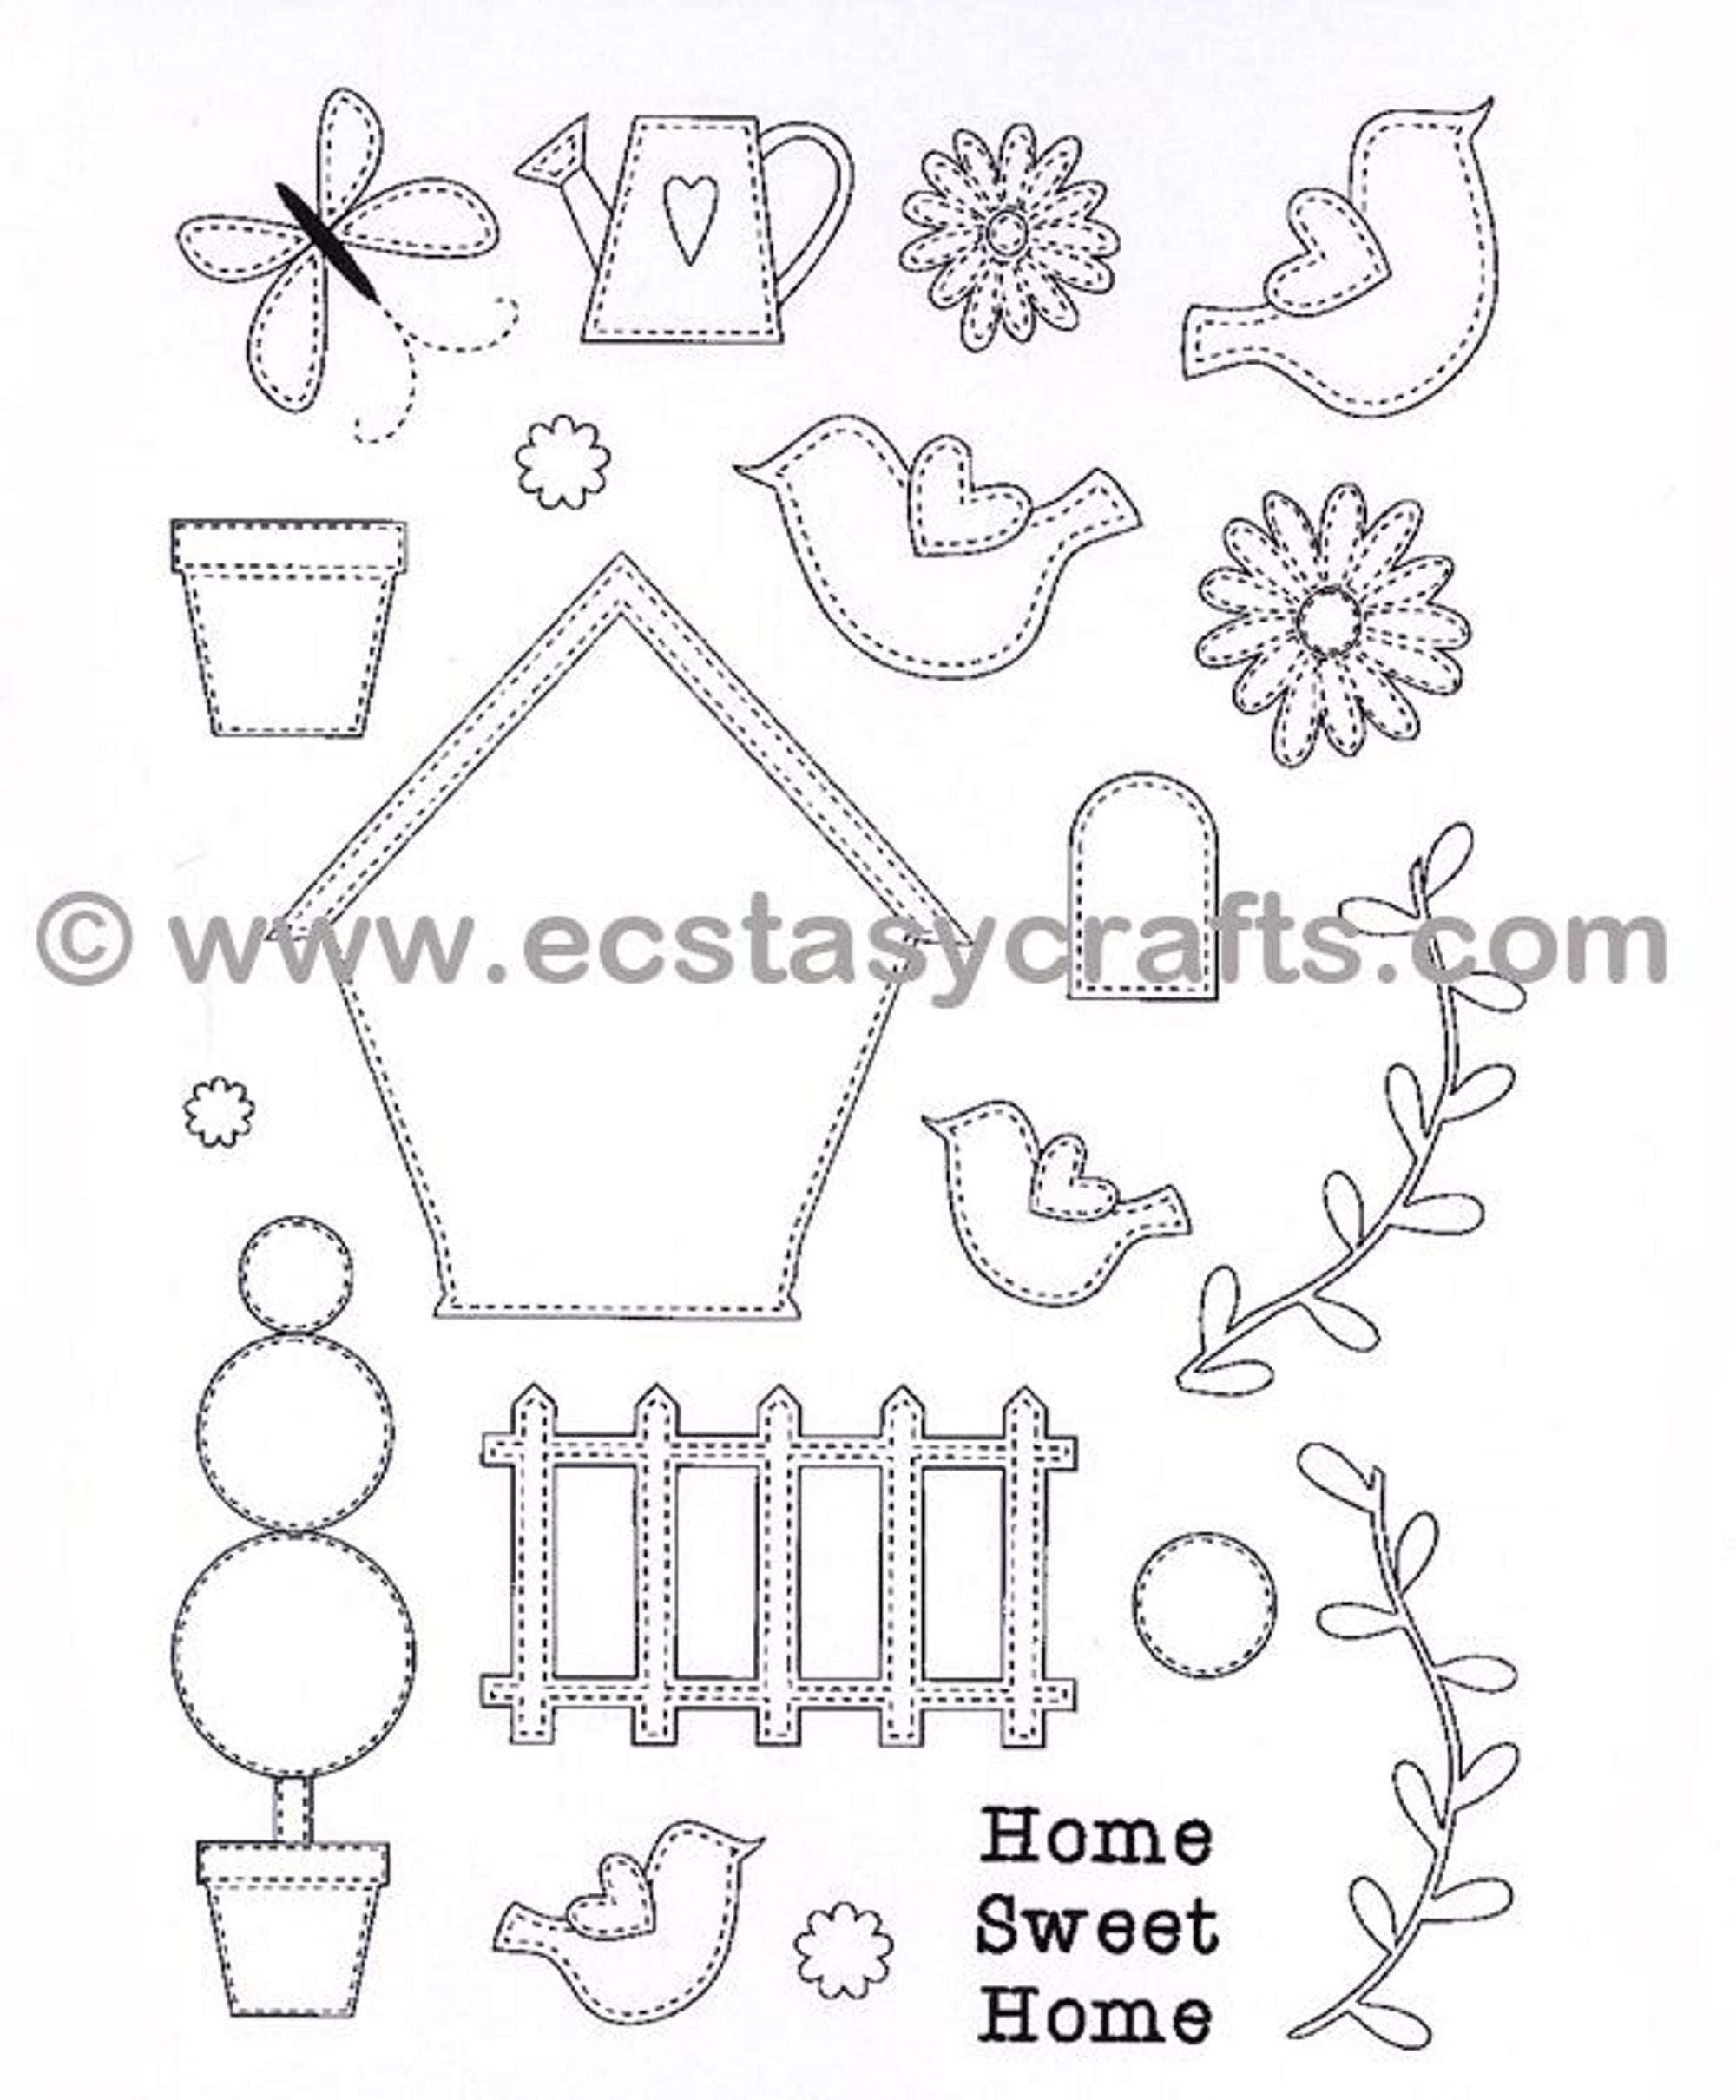 Creative Expressions Stamp - In The Garden